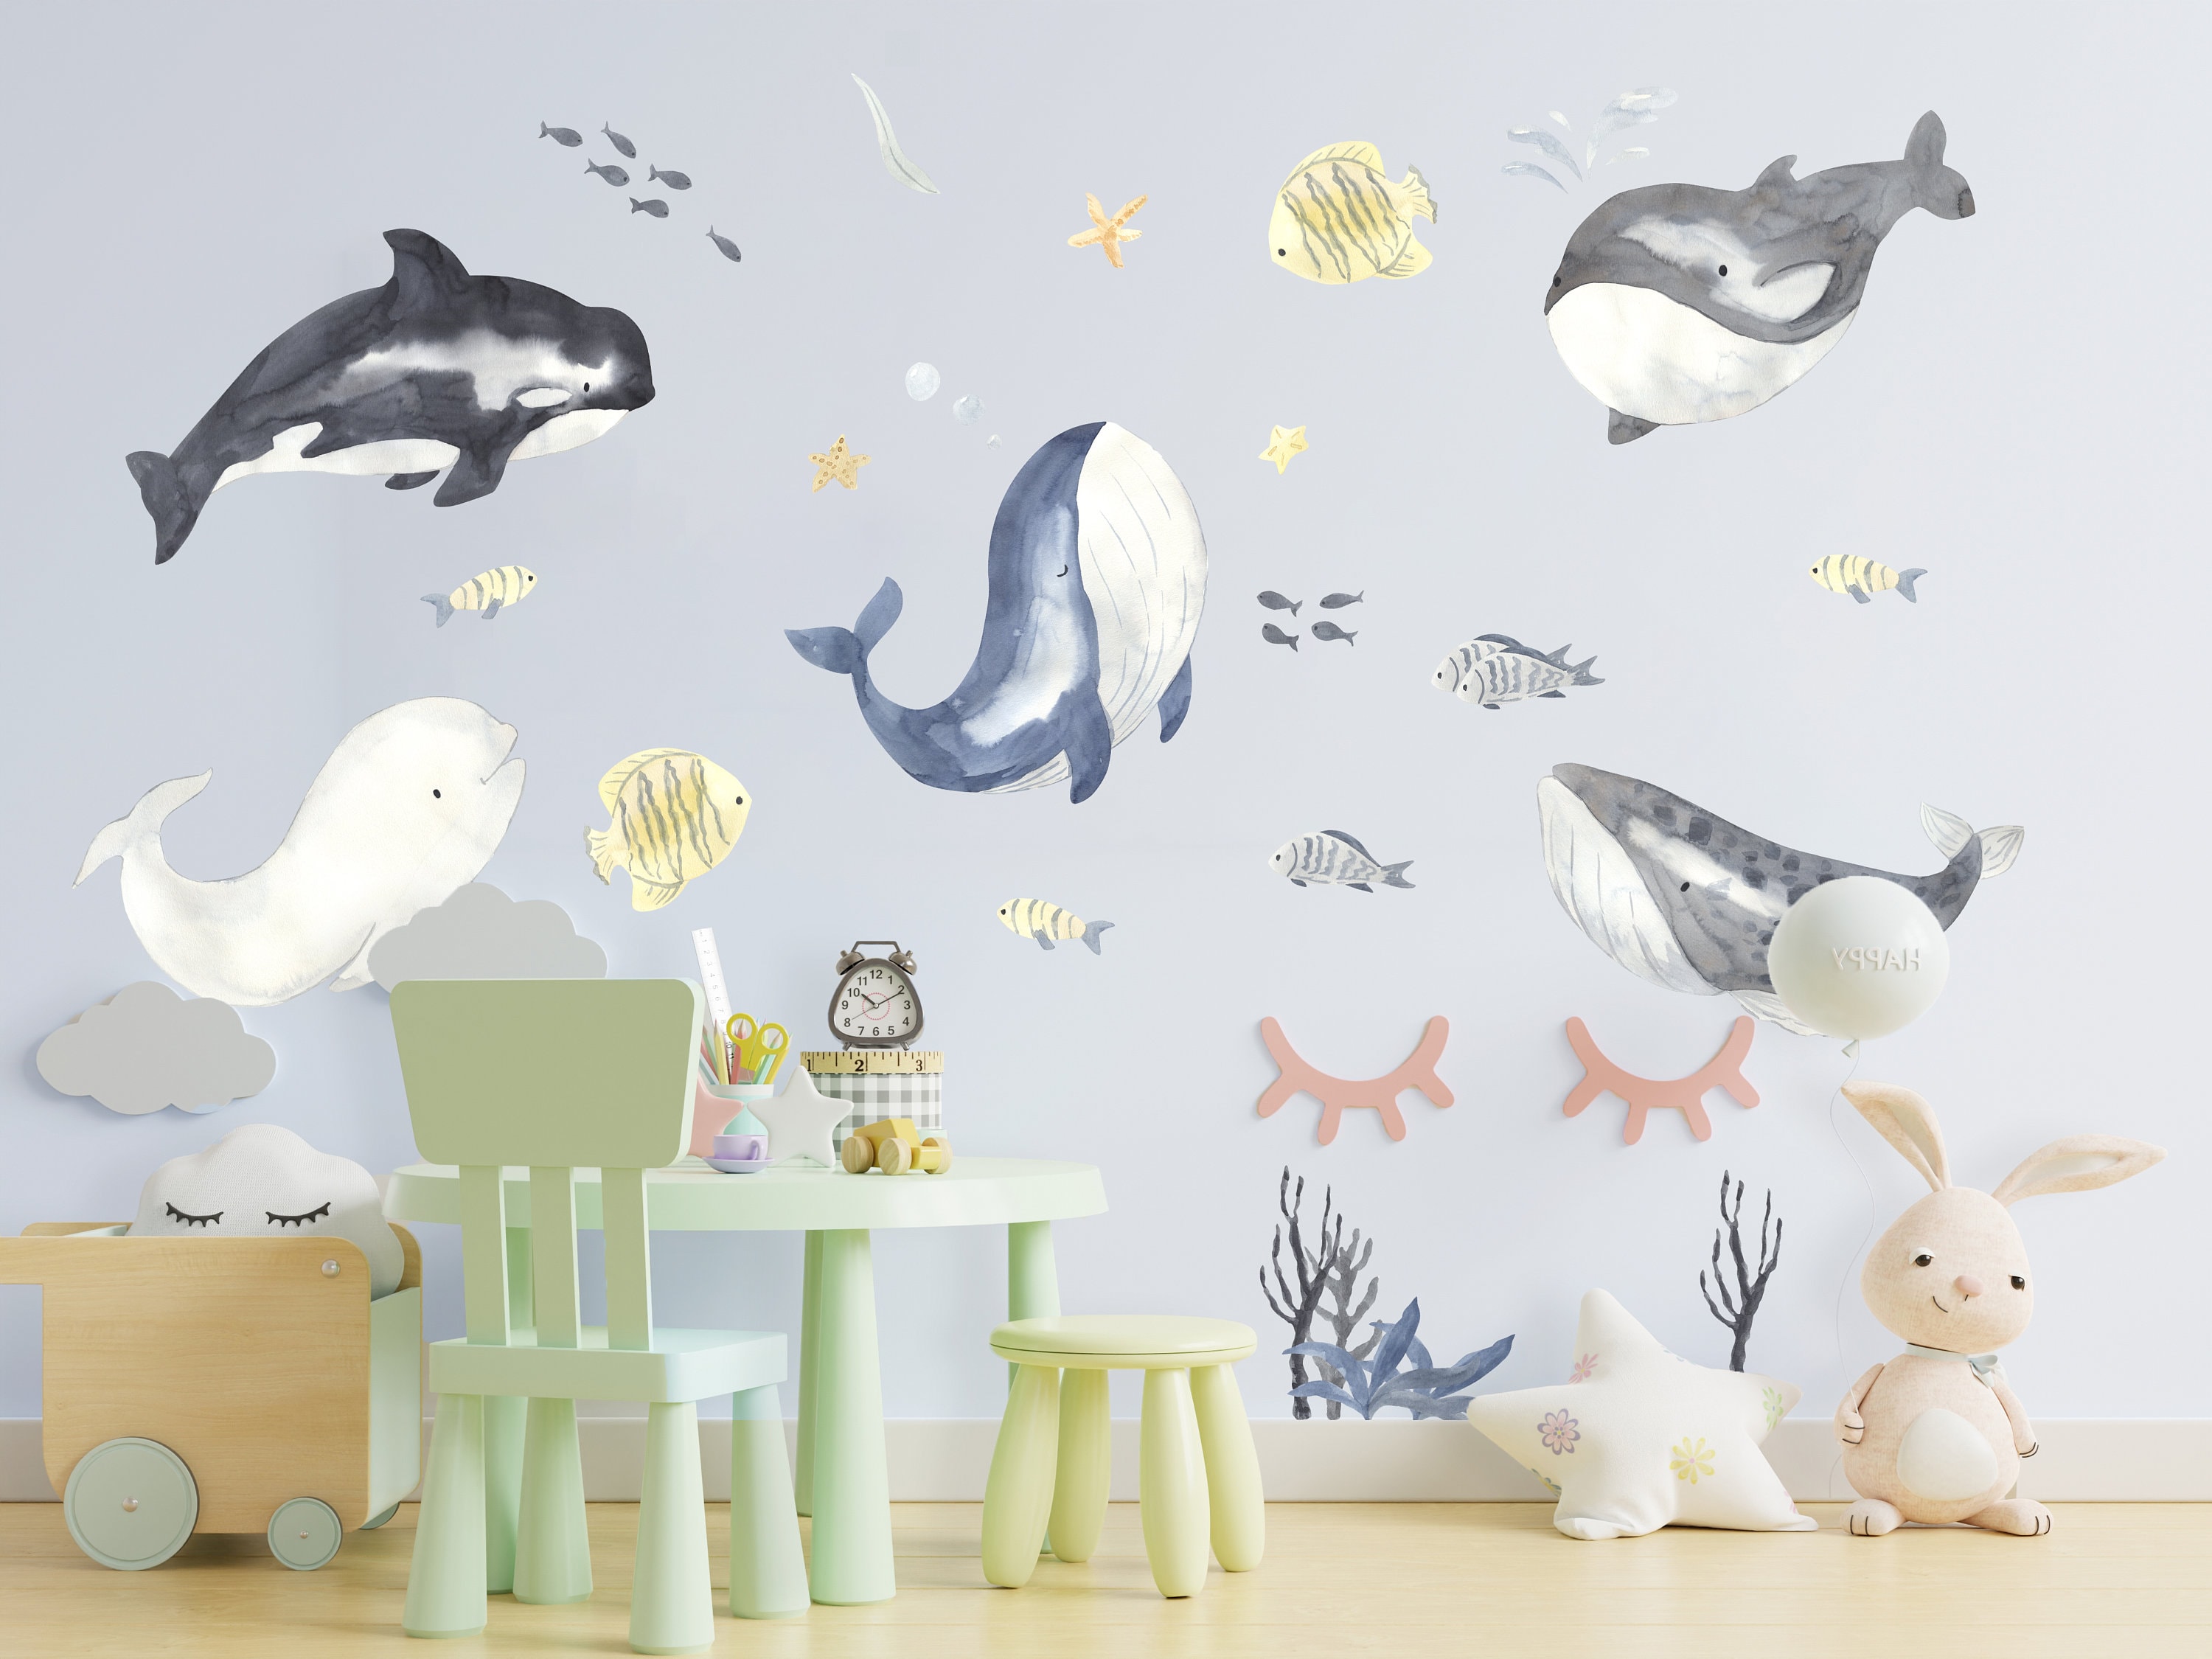 Sea Whales Wall Sticker for Kids Room Decor the Under Ocean Life